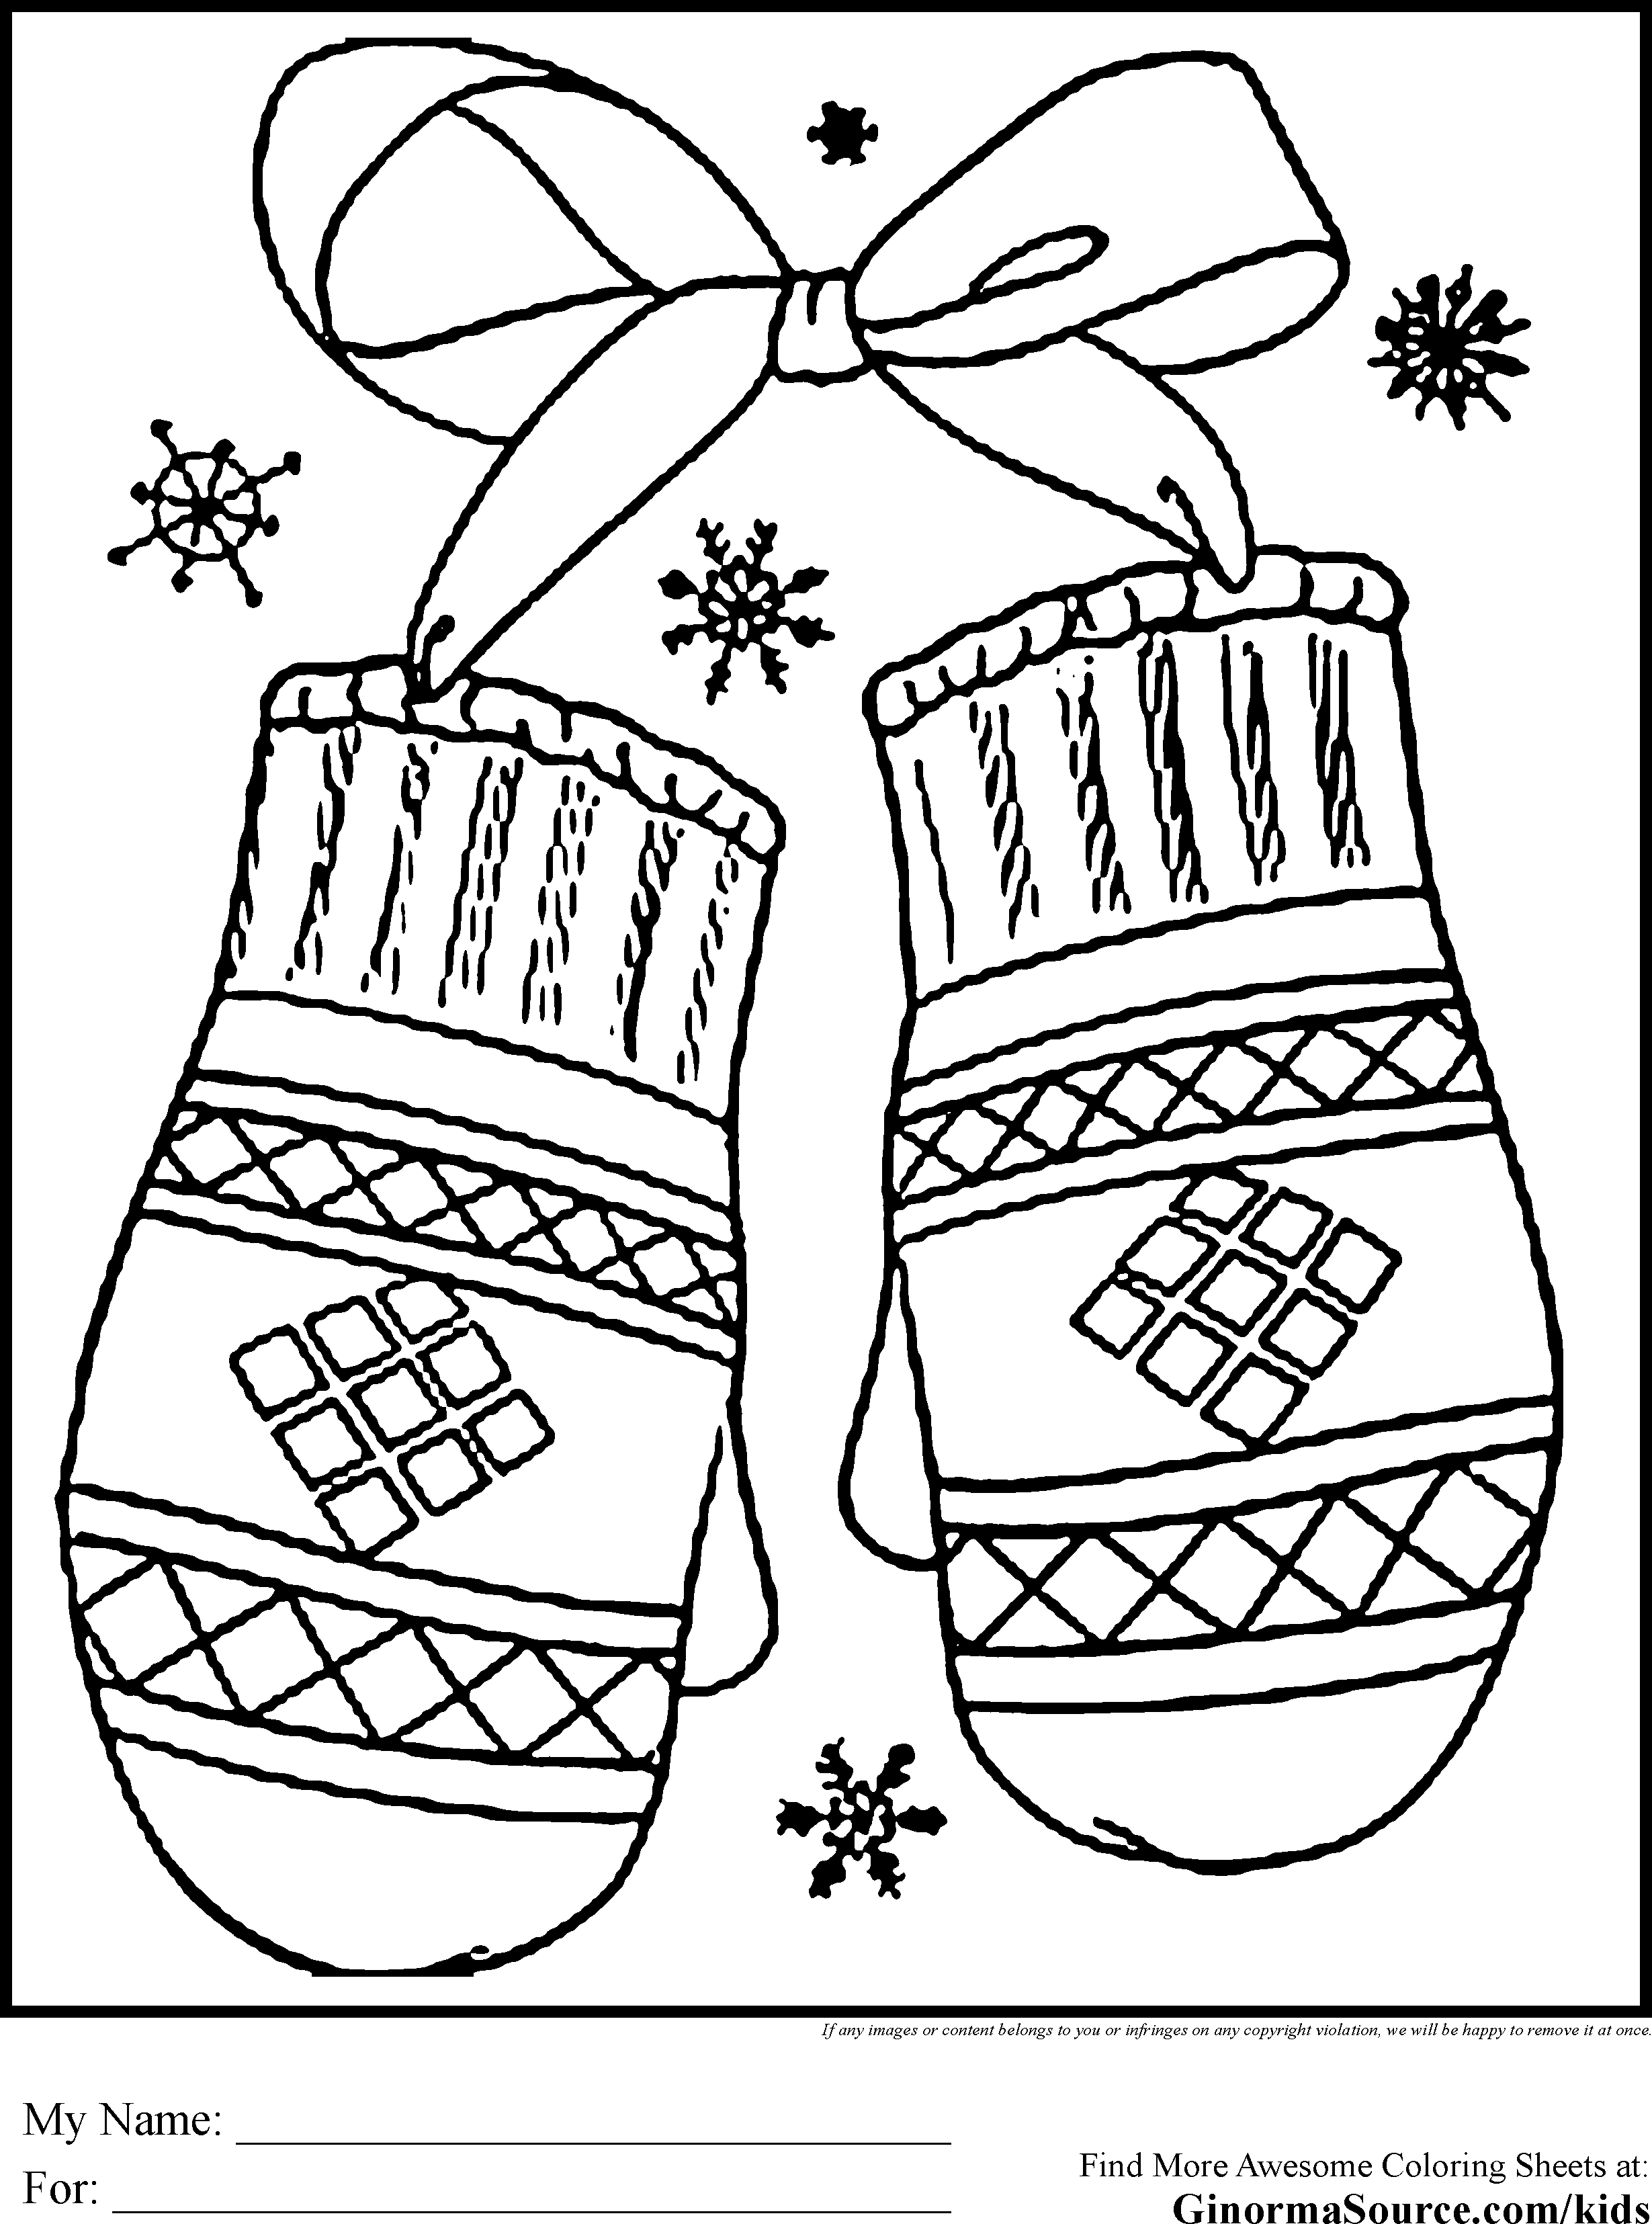 Winter Season Coloring Pages   Crafts and Worksheets for ...